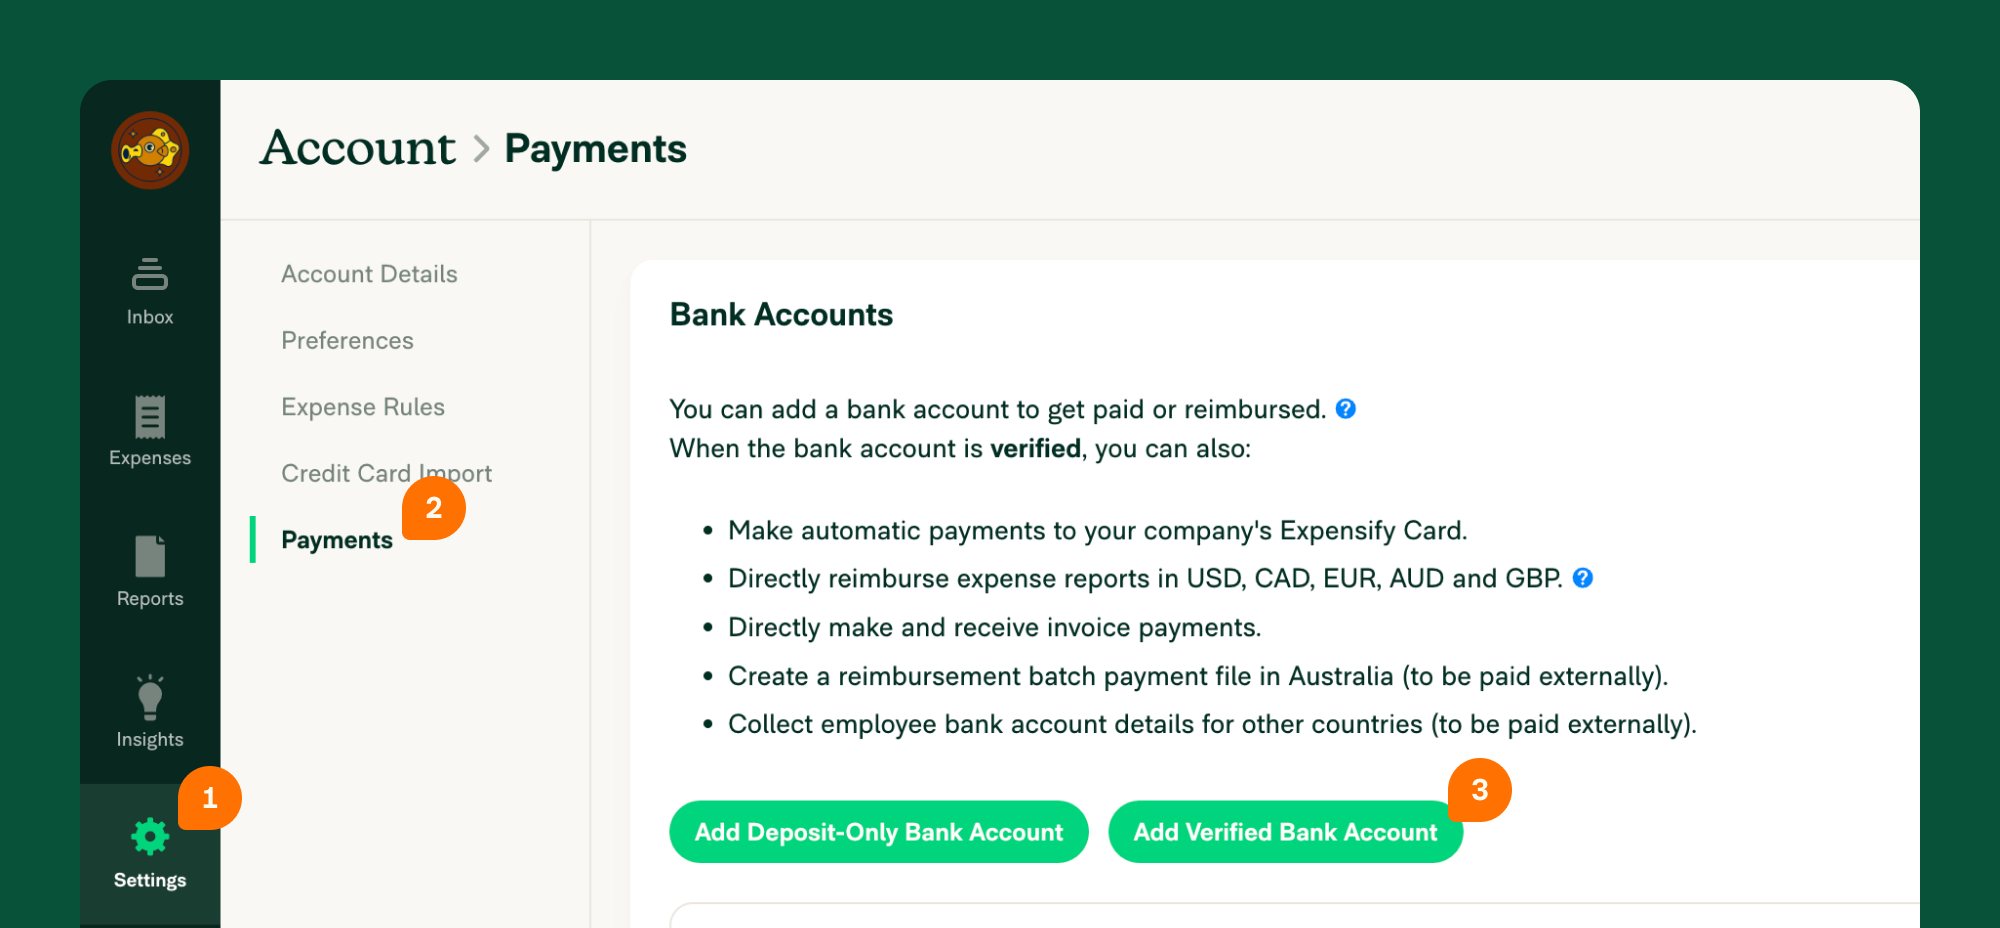 Click the Verified Bank Account button in the bottom right-hand corner of the screen